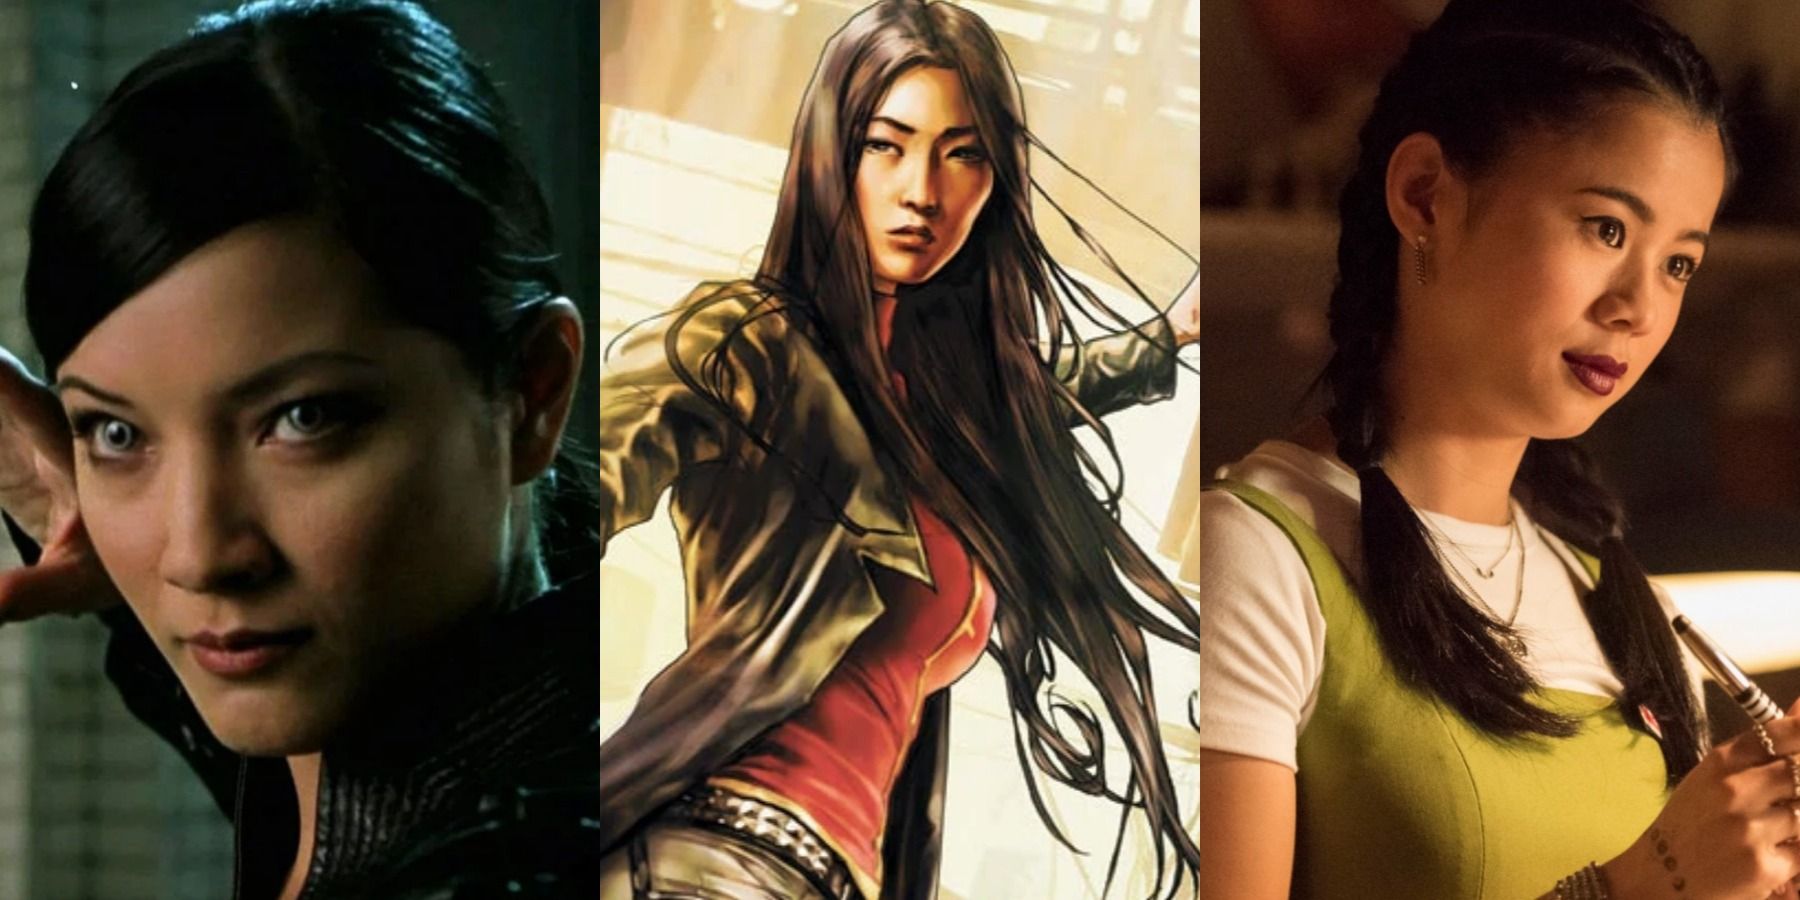 A split image depicts Kelly Hu as Lady Deathstrike, Lady Shiva in DC Comics, and Leah Lewis as George Fan